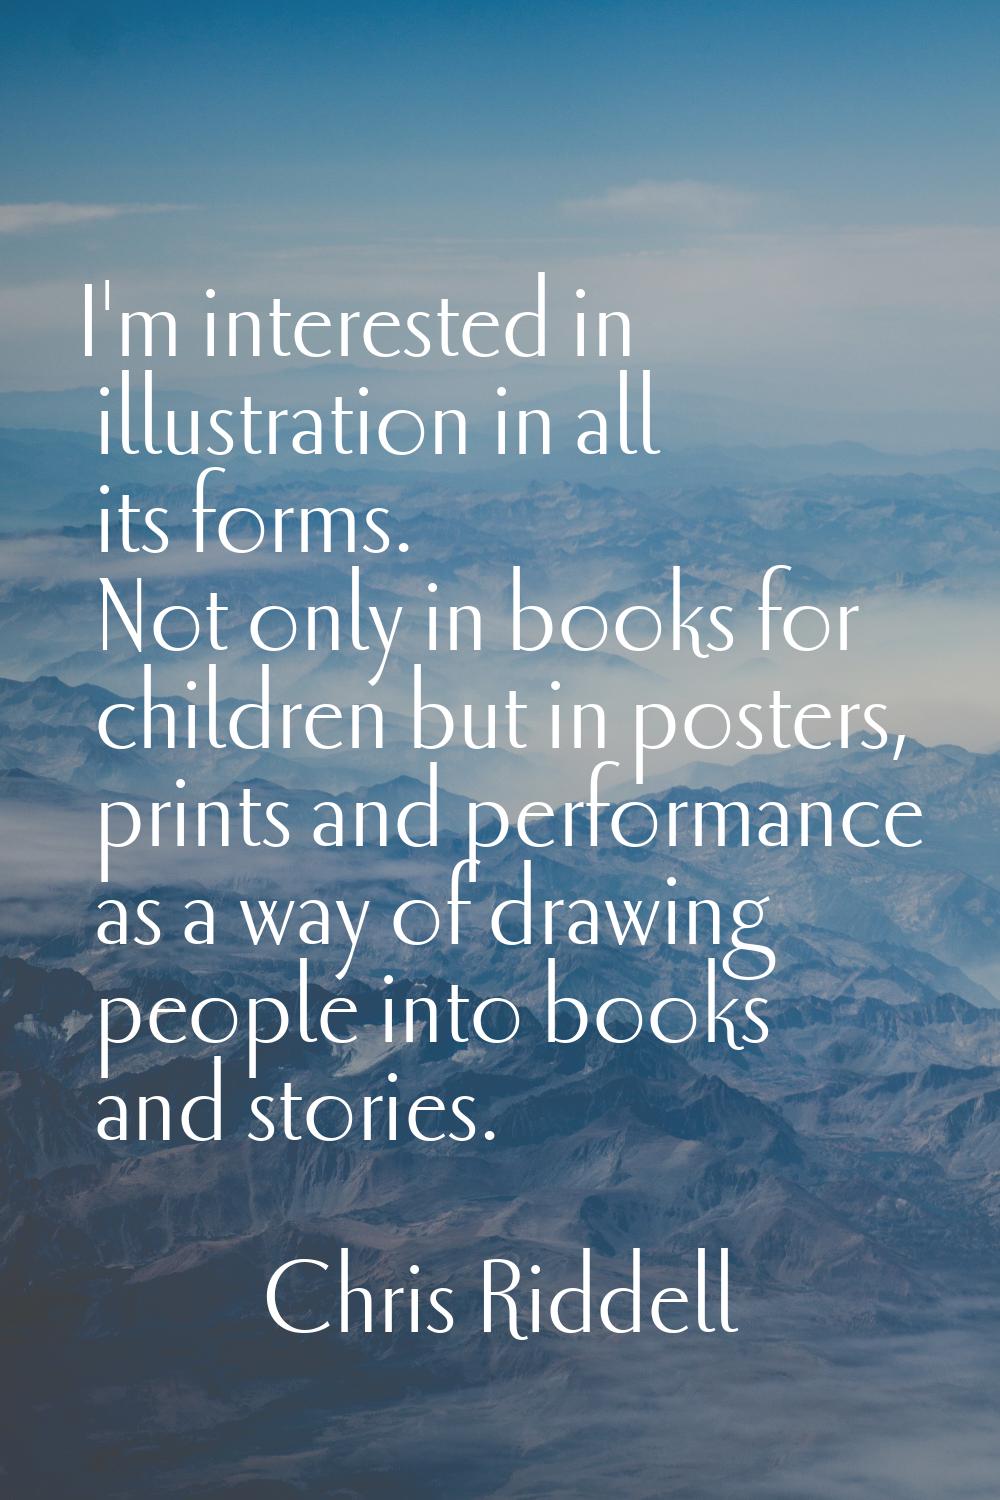 I'm interested in illustration in all its forms. Not only in books for children but in posters, pri